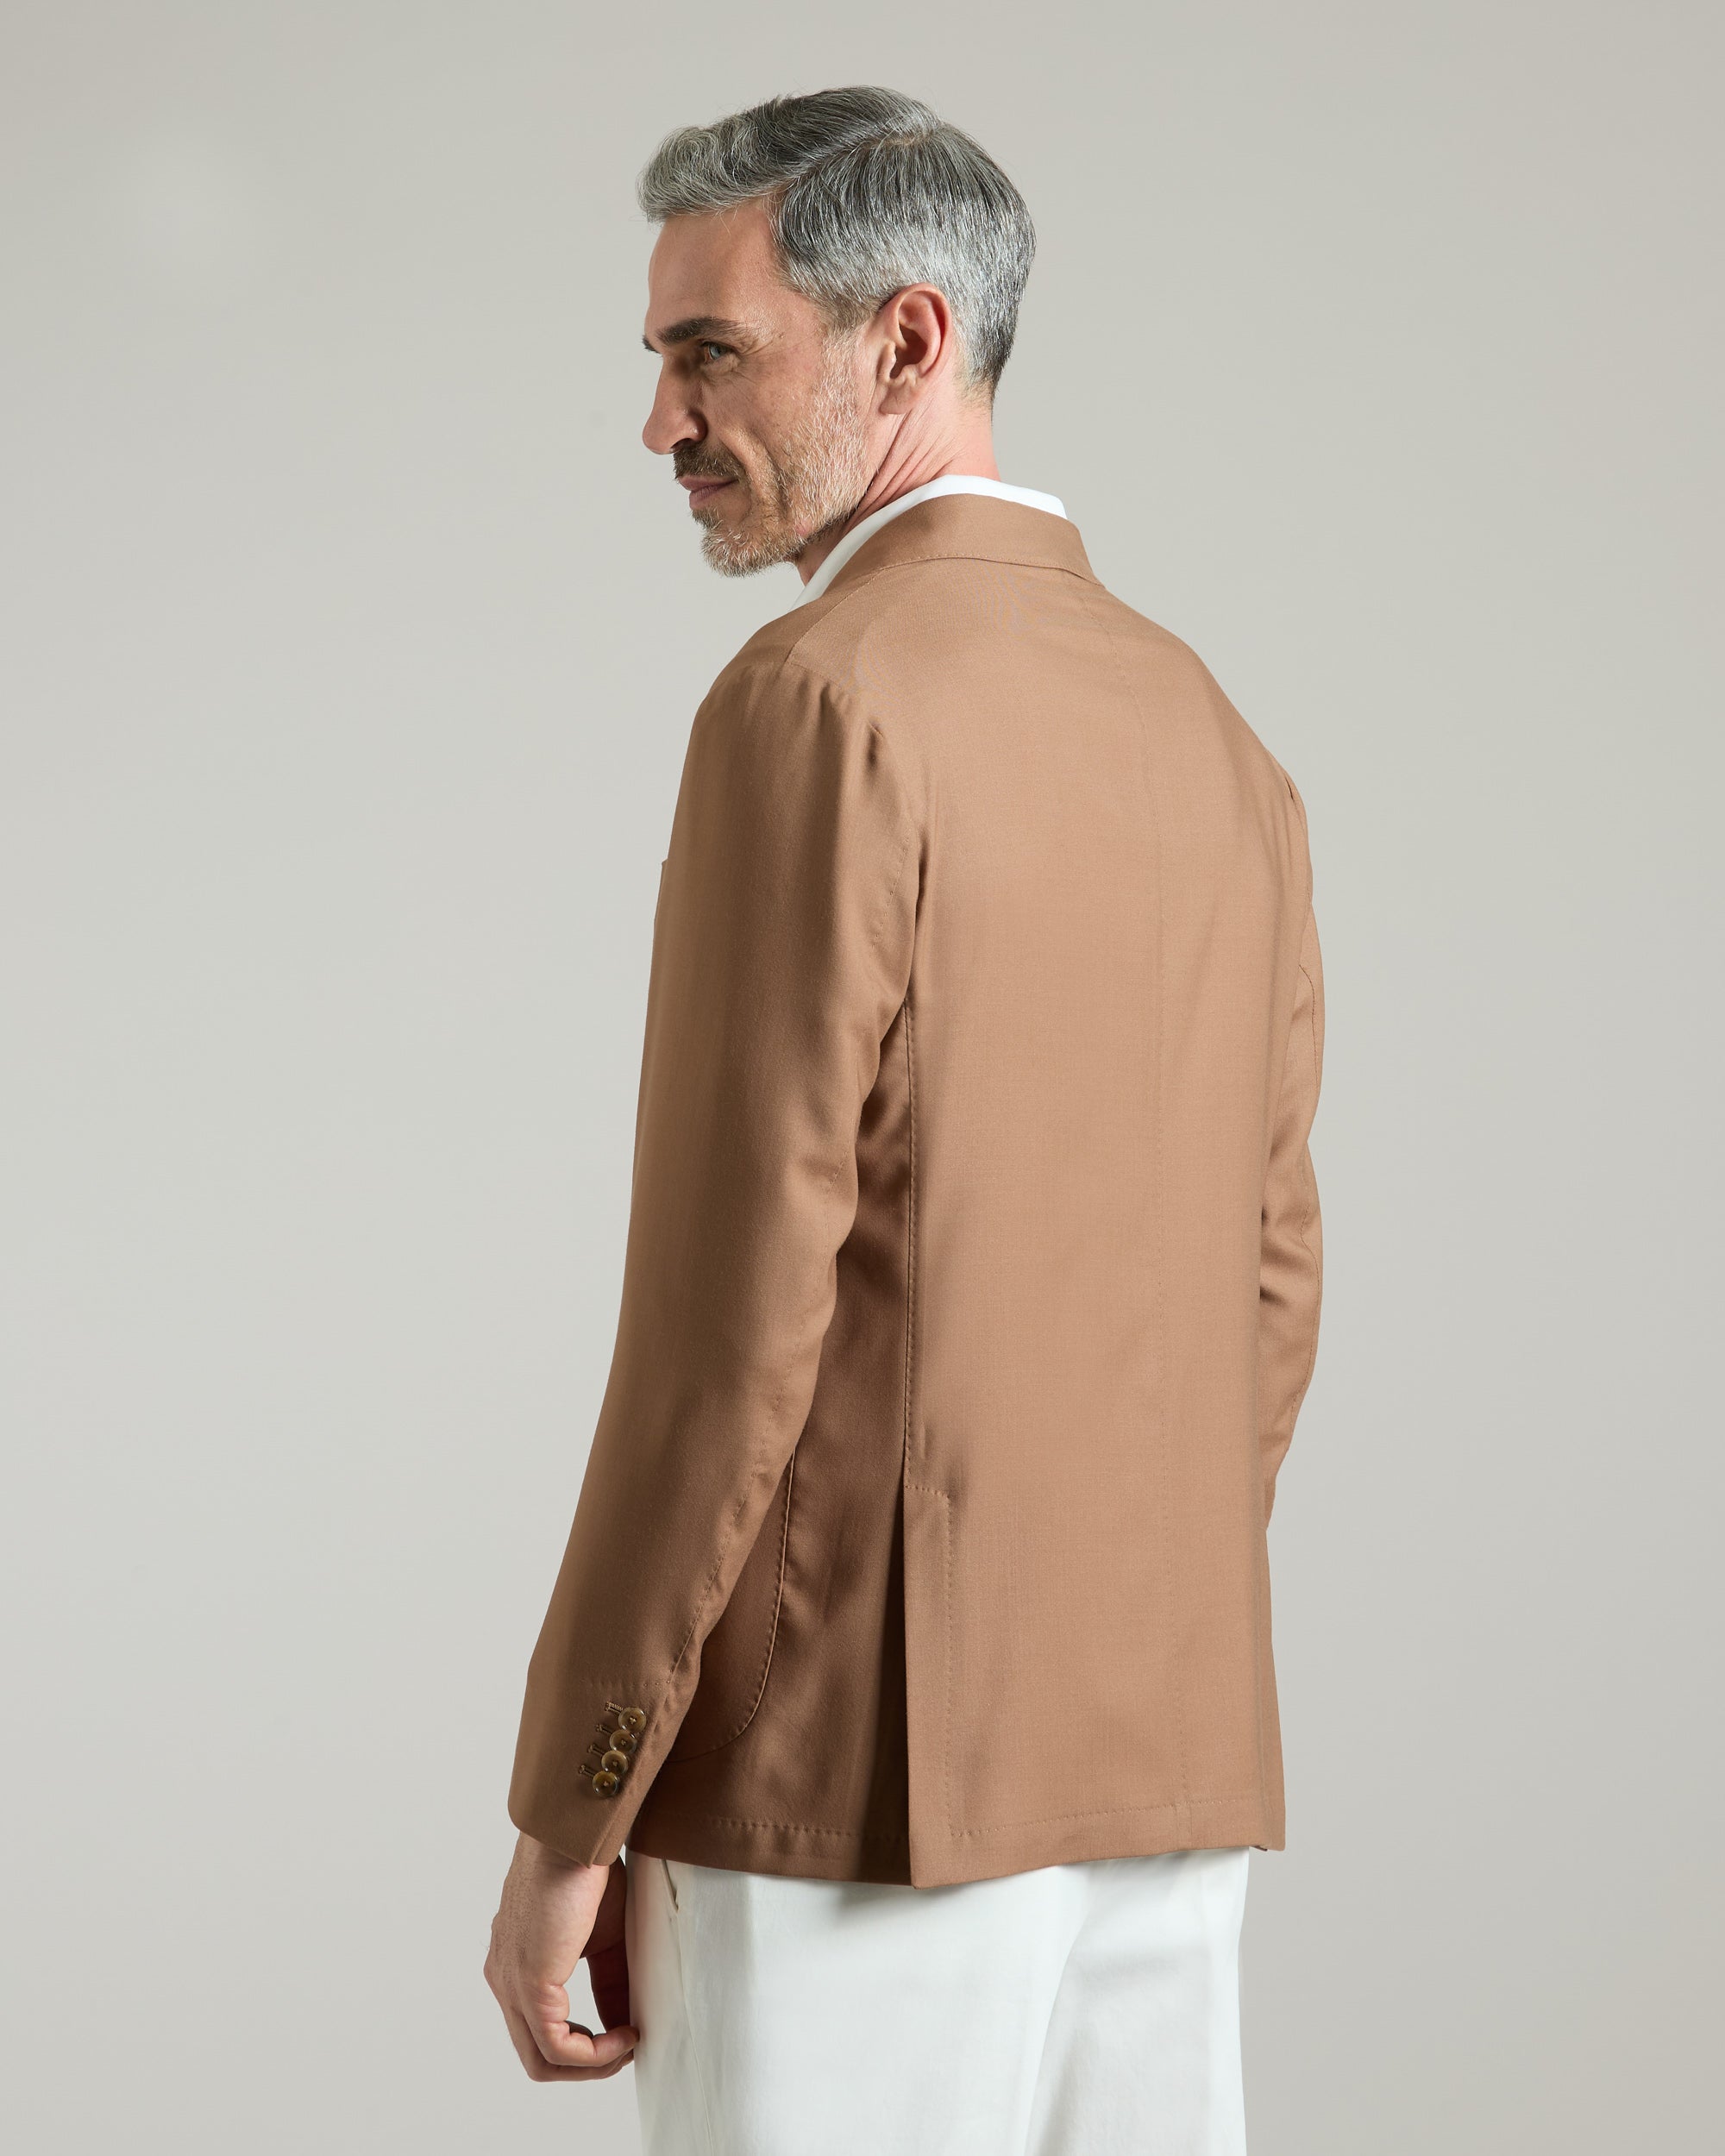 Giacca ROBERT in Cashmere 4.0 tabacco